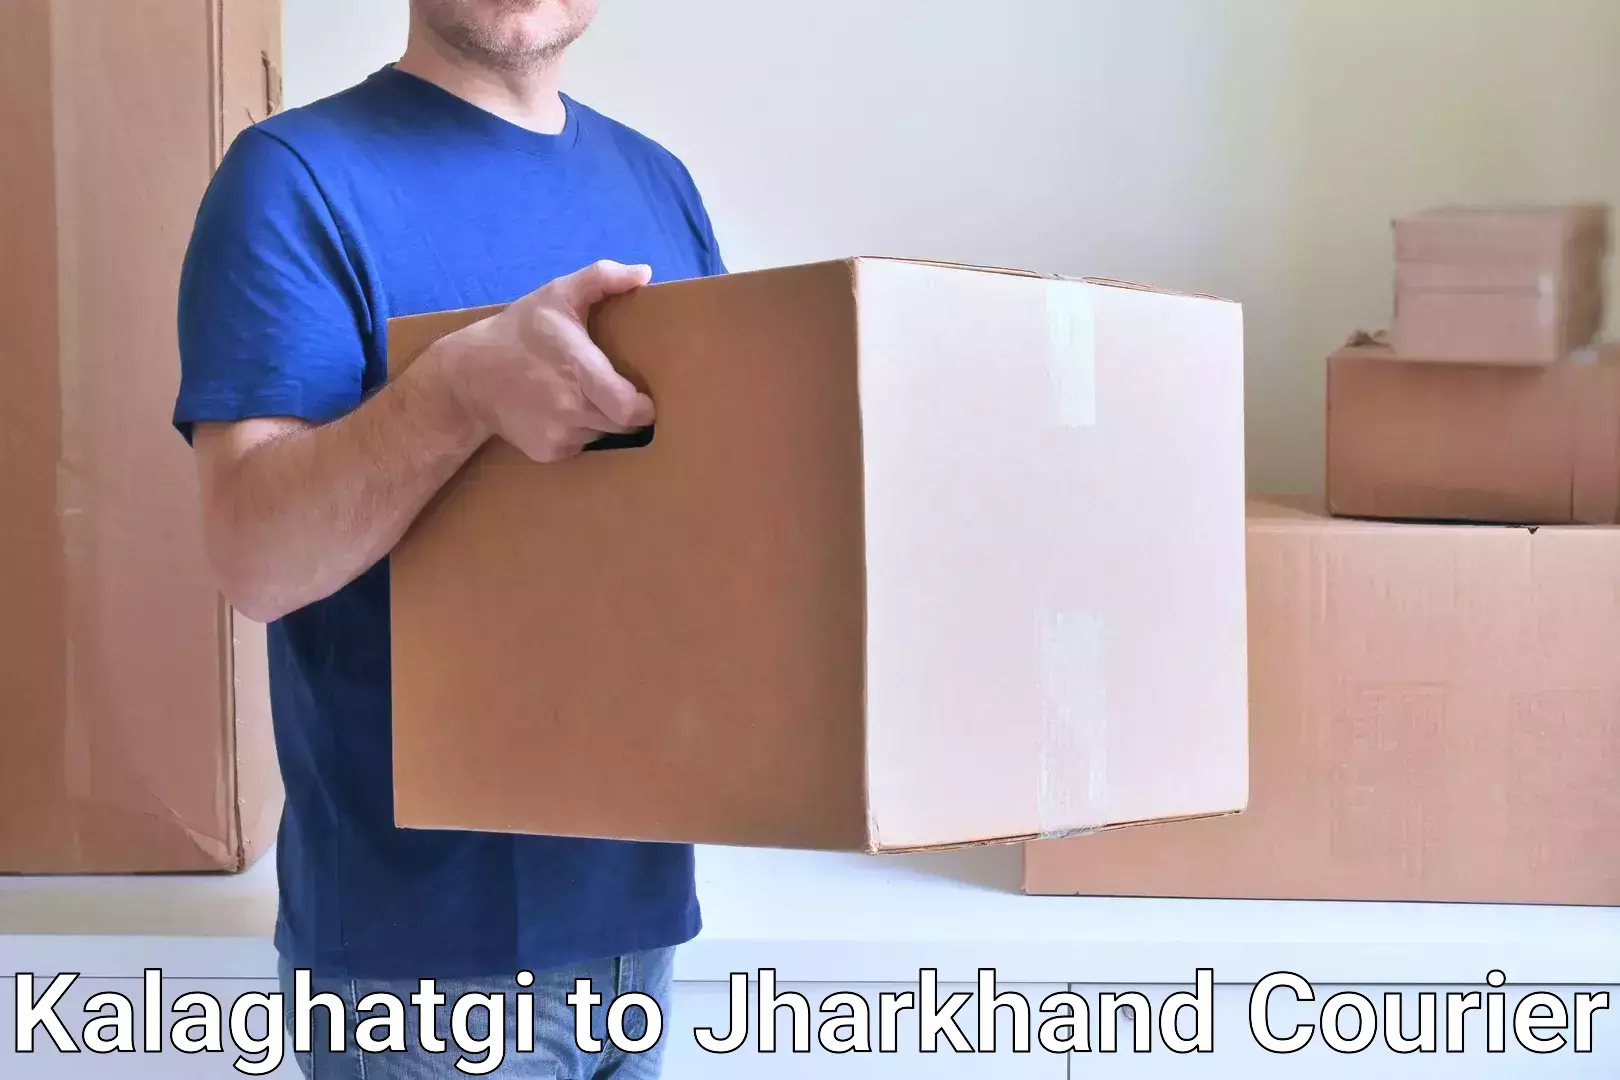 Courier service comparison Kalaghatgi to Birla Institute of Technology Ranchi